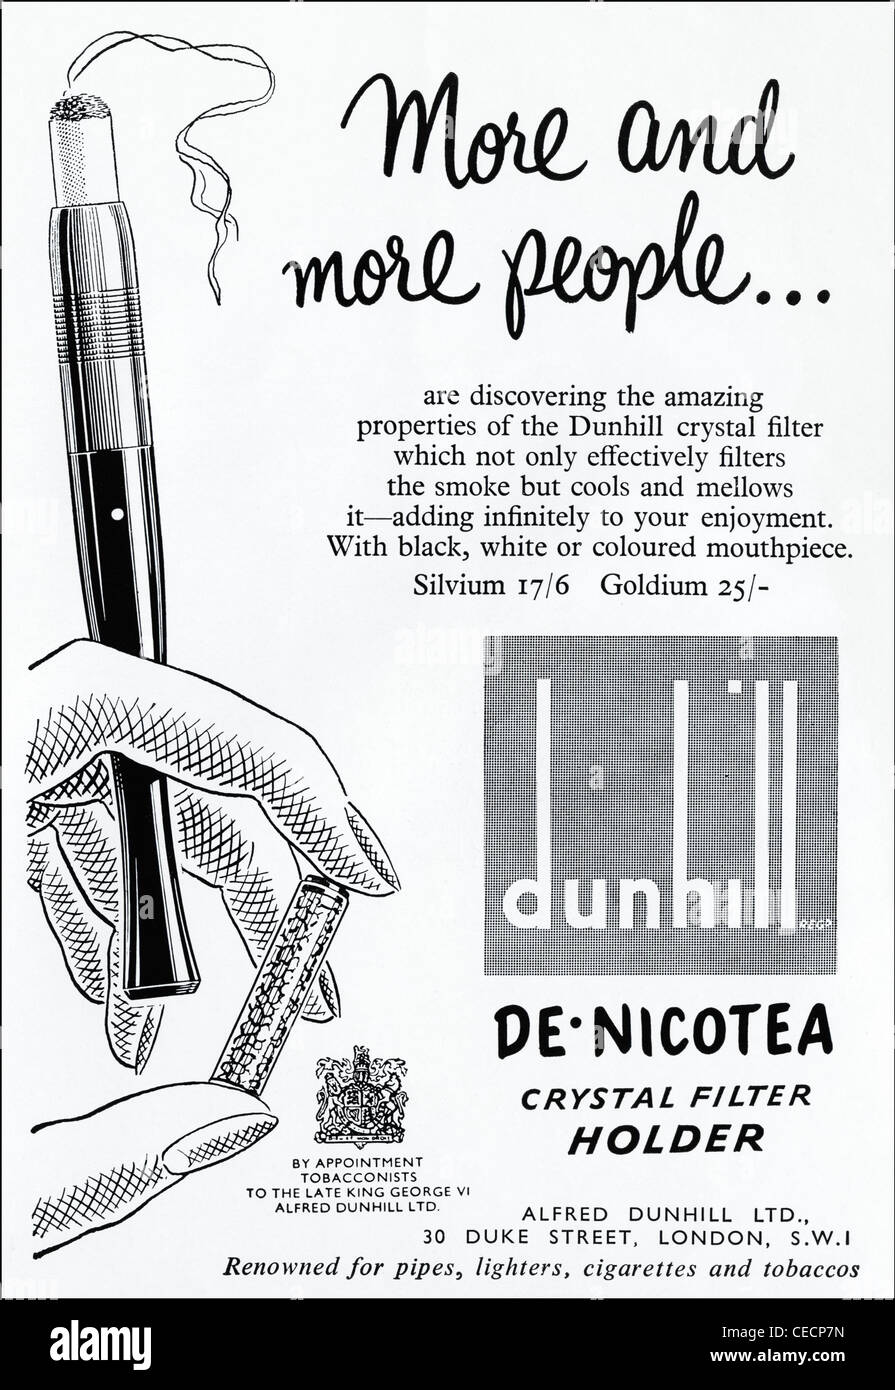 Original advert from 1950s news magazine advertising DUNHILL cigarette filter holder by appointment to the late King George VI Stock Photo